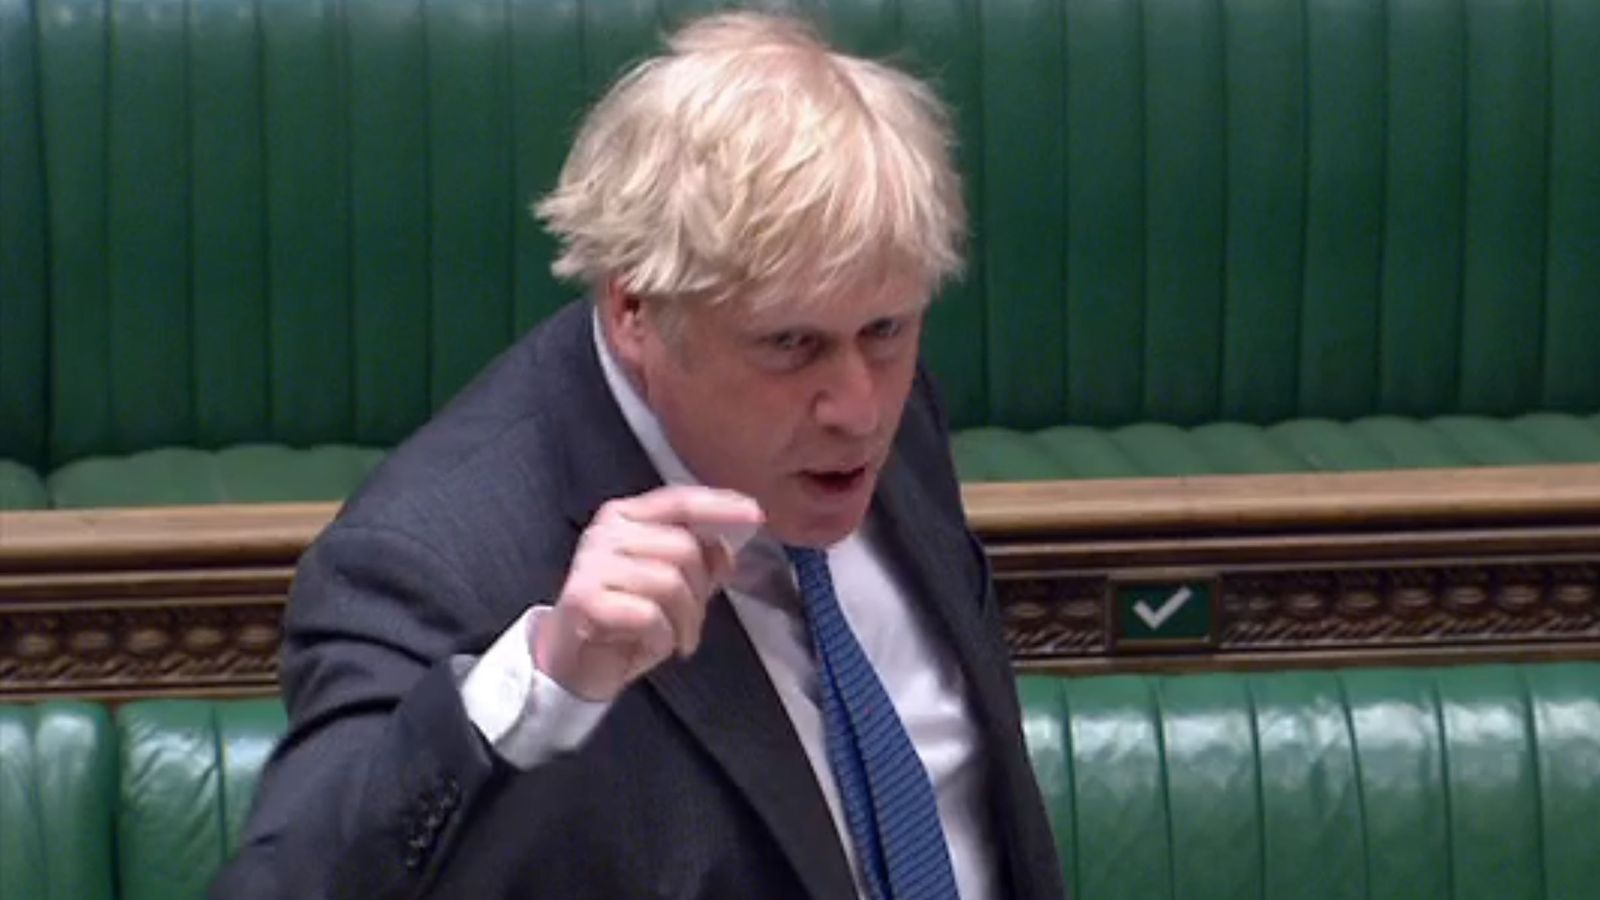 Boris Johnson's flaws are all priced in - but his red-faced rage showed a  flash of his true feelings | Politics News | Sky News